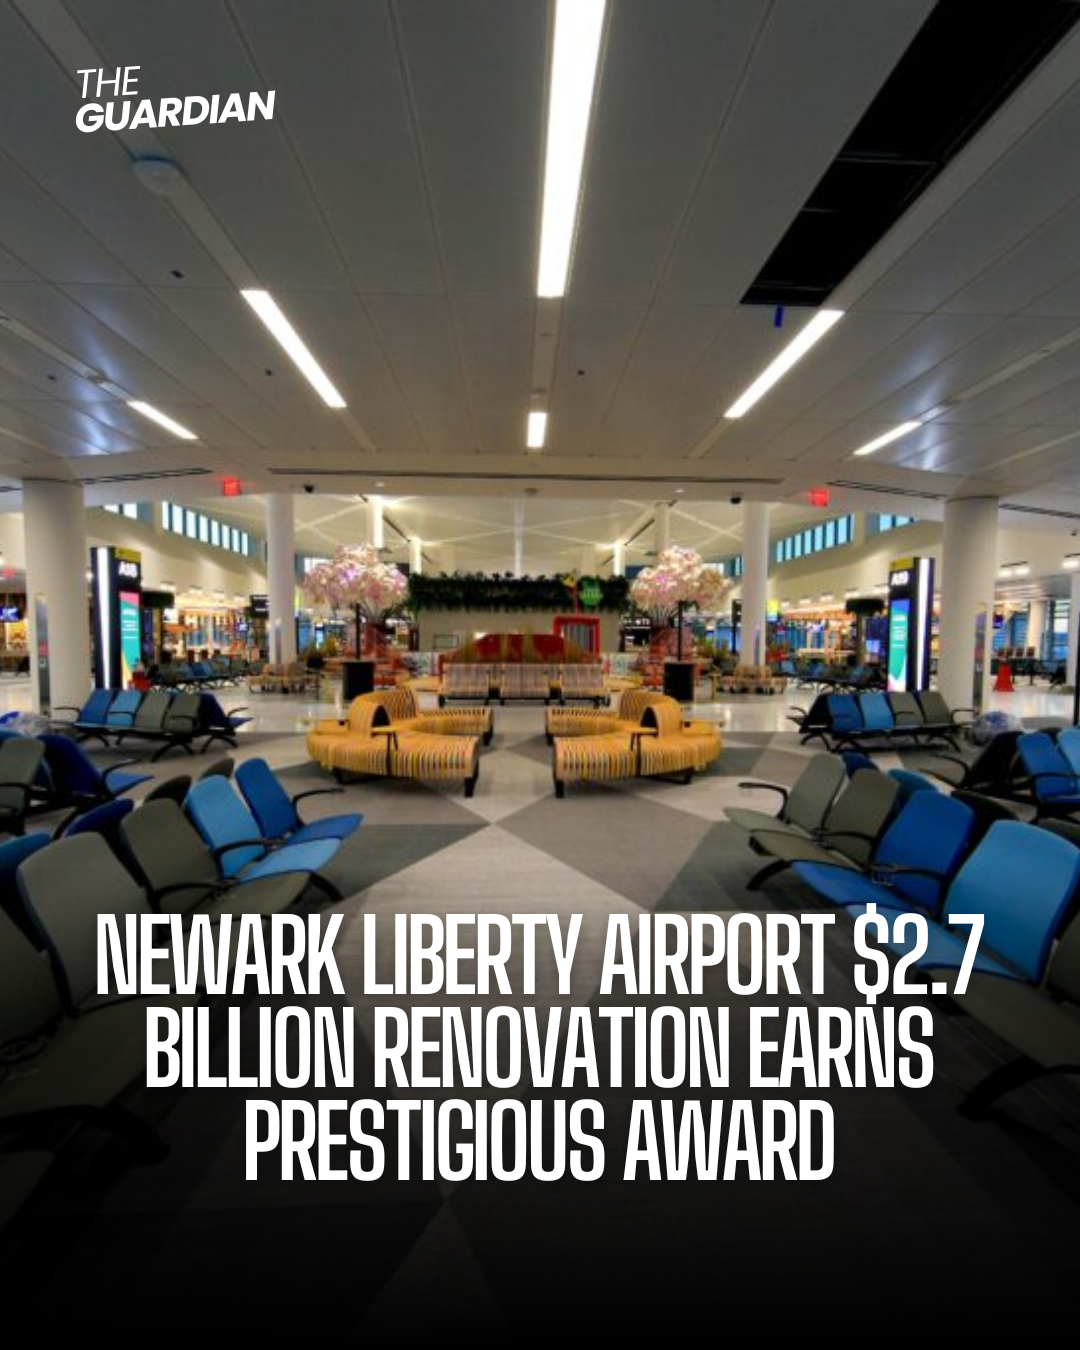 Newark Liberty International Airport is vibrating with enthusiasm after the completion of its huge $2.7 billion refurbishment.